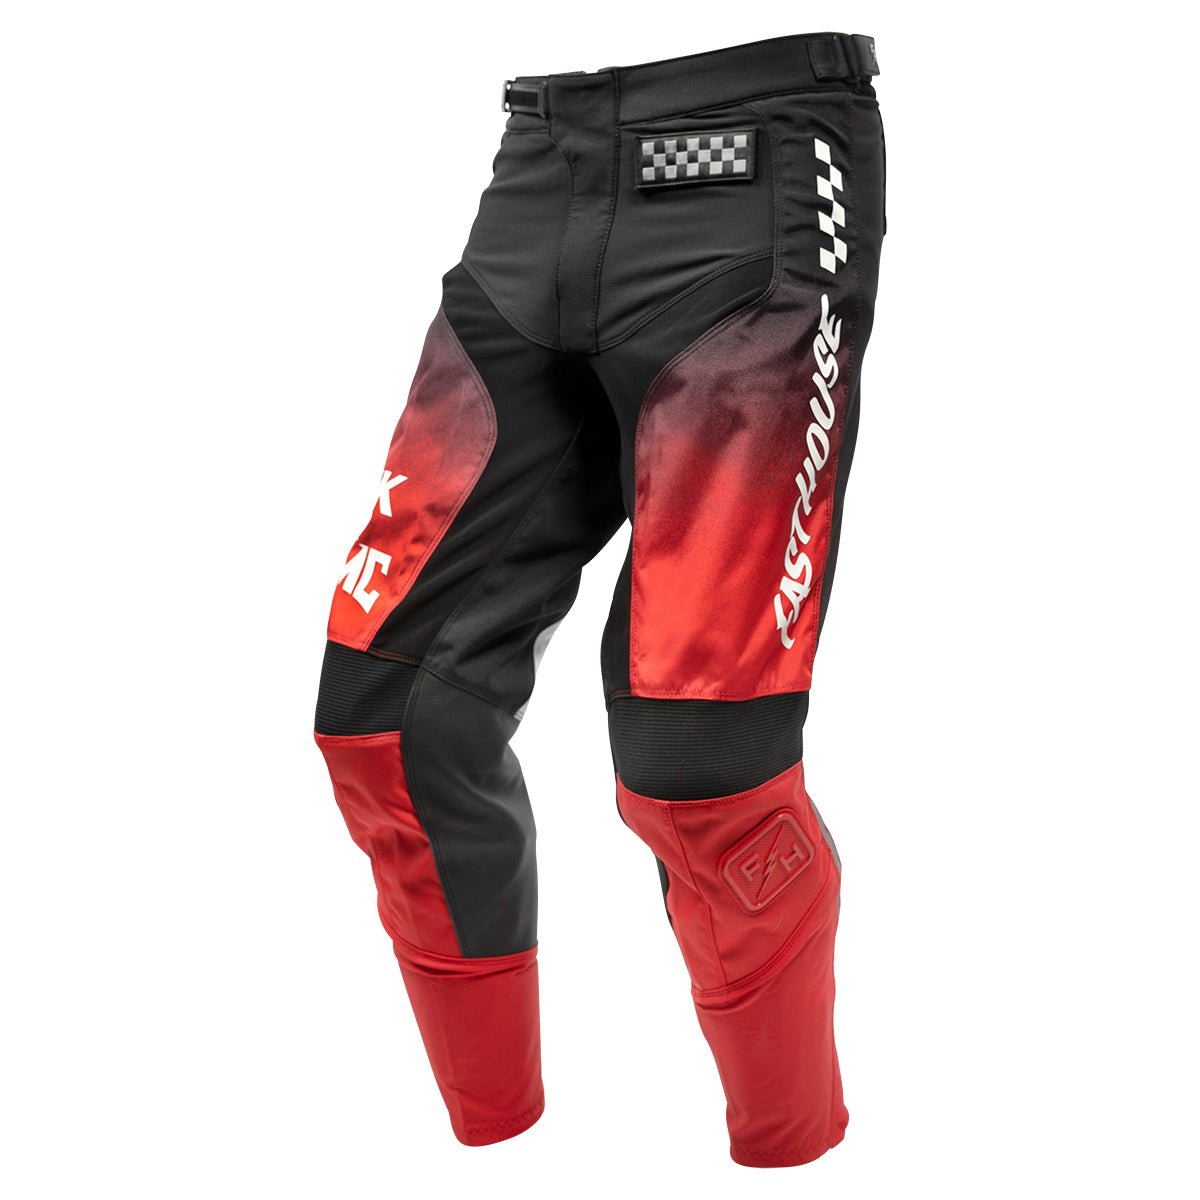 Grindhouse Twitch Pant - Black/Red